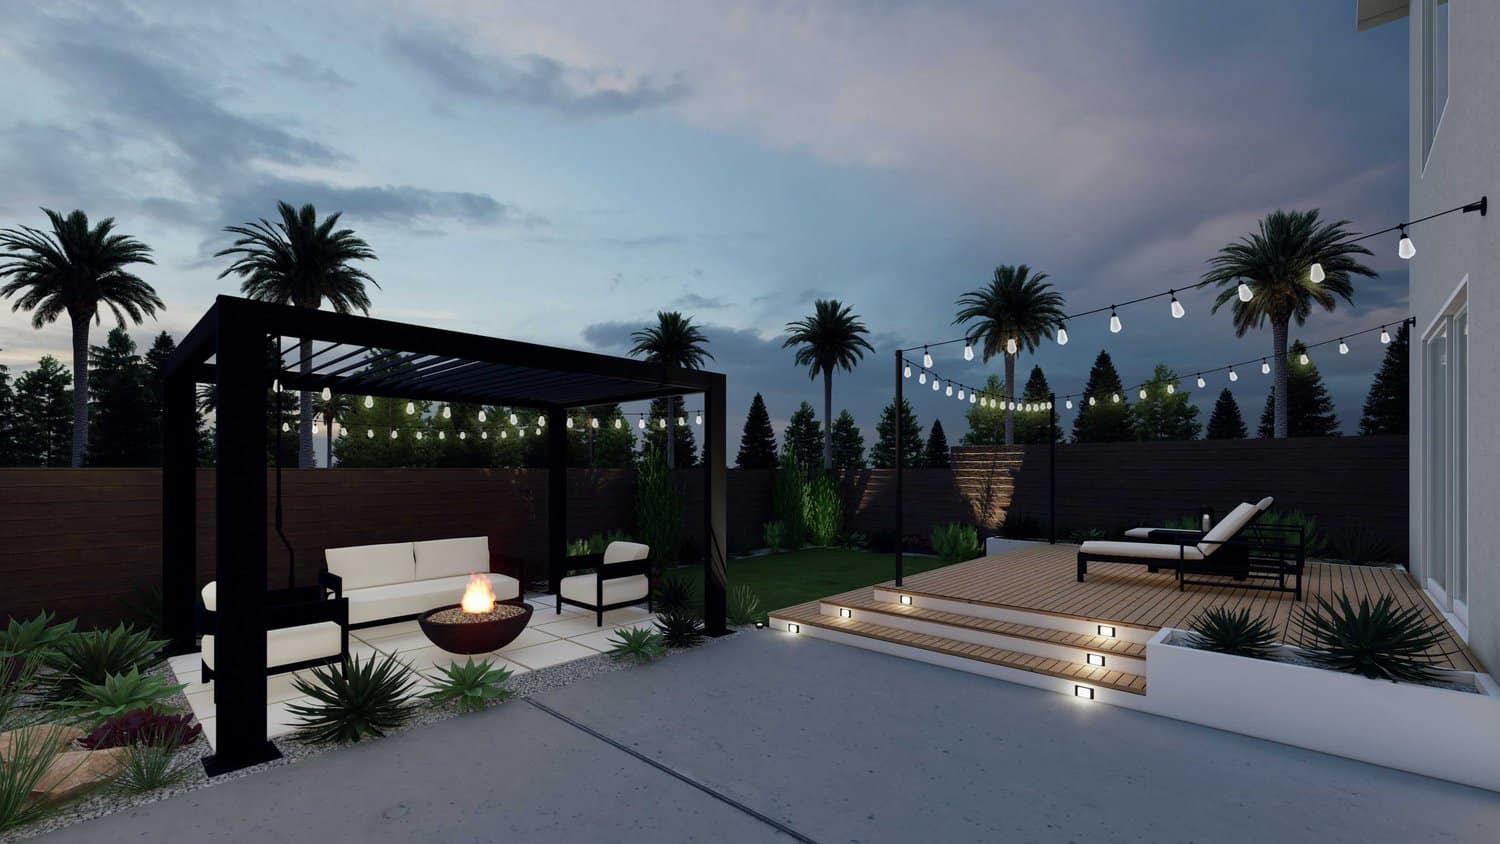 Los Angeles full backyard showing paver patio and pergola seating area with firepit, plants and grass, gravel, concrete flooring and deck with string lights